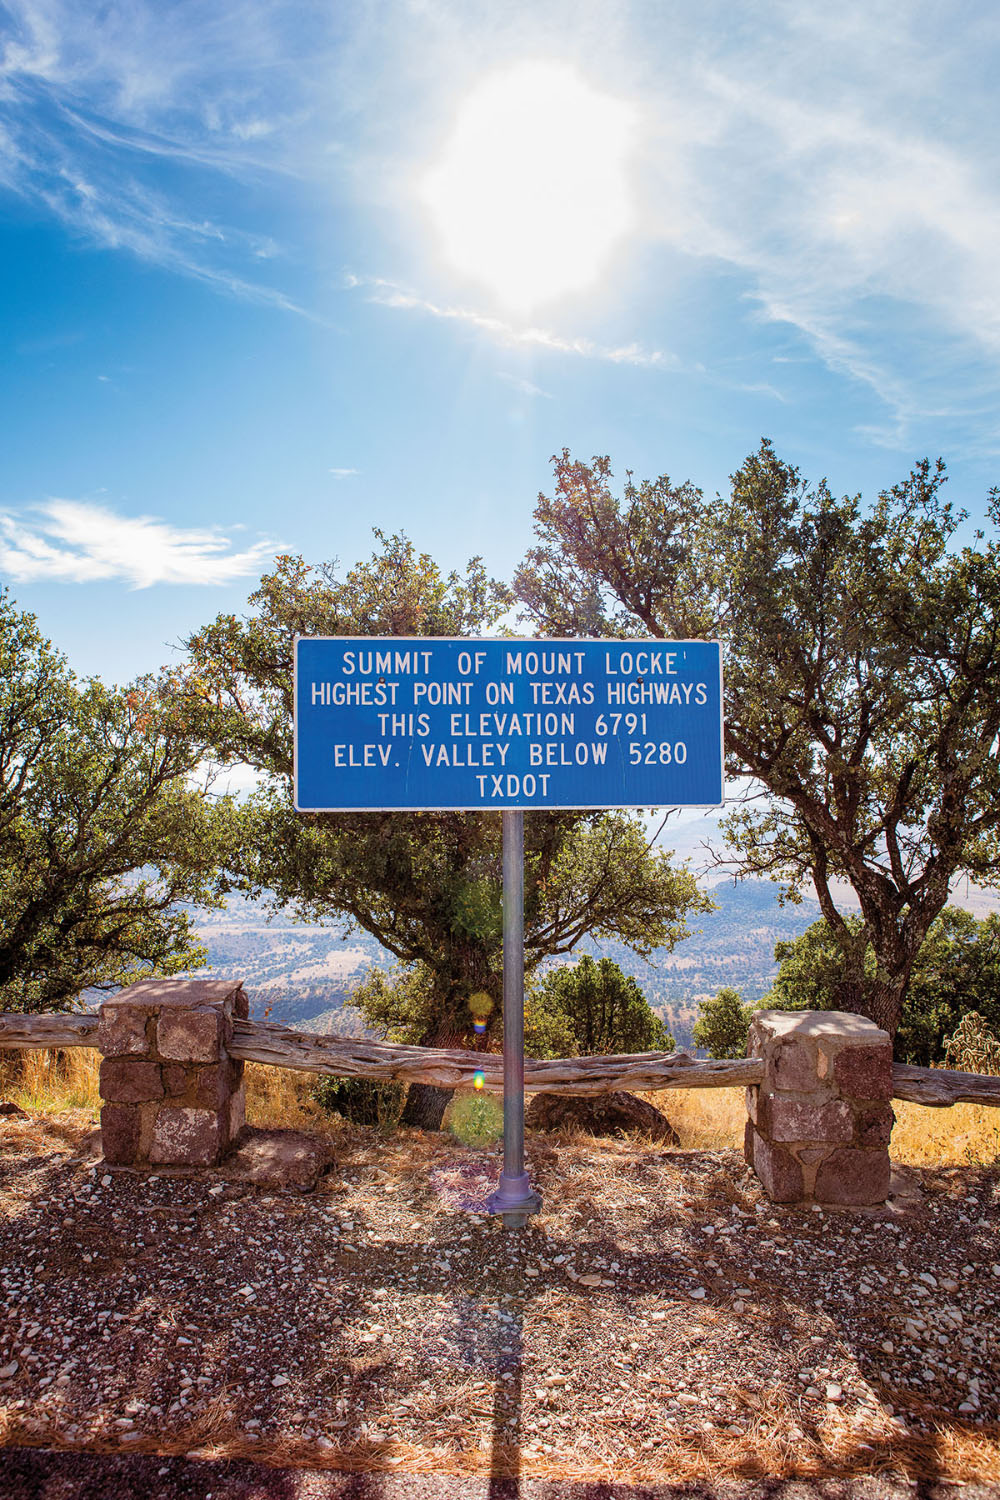 A picture of a sign reading "Summit of Mount Locke. Highest point on Texas Highways. This elevation 6791, elev. valley below 5280. TxDOT."